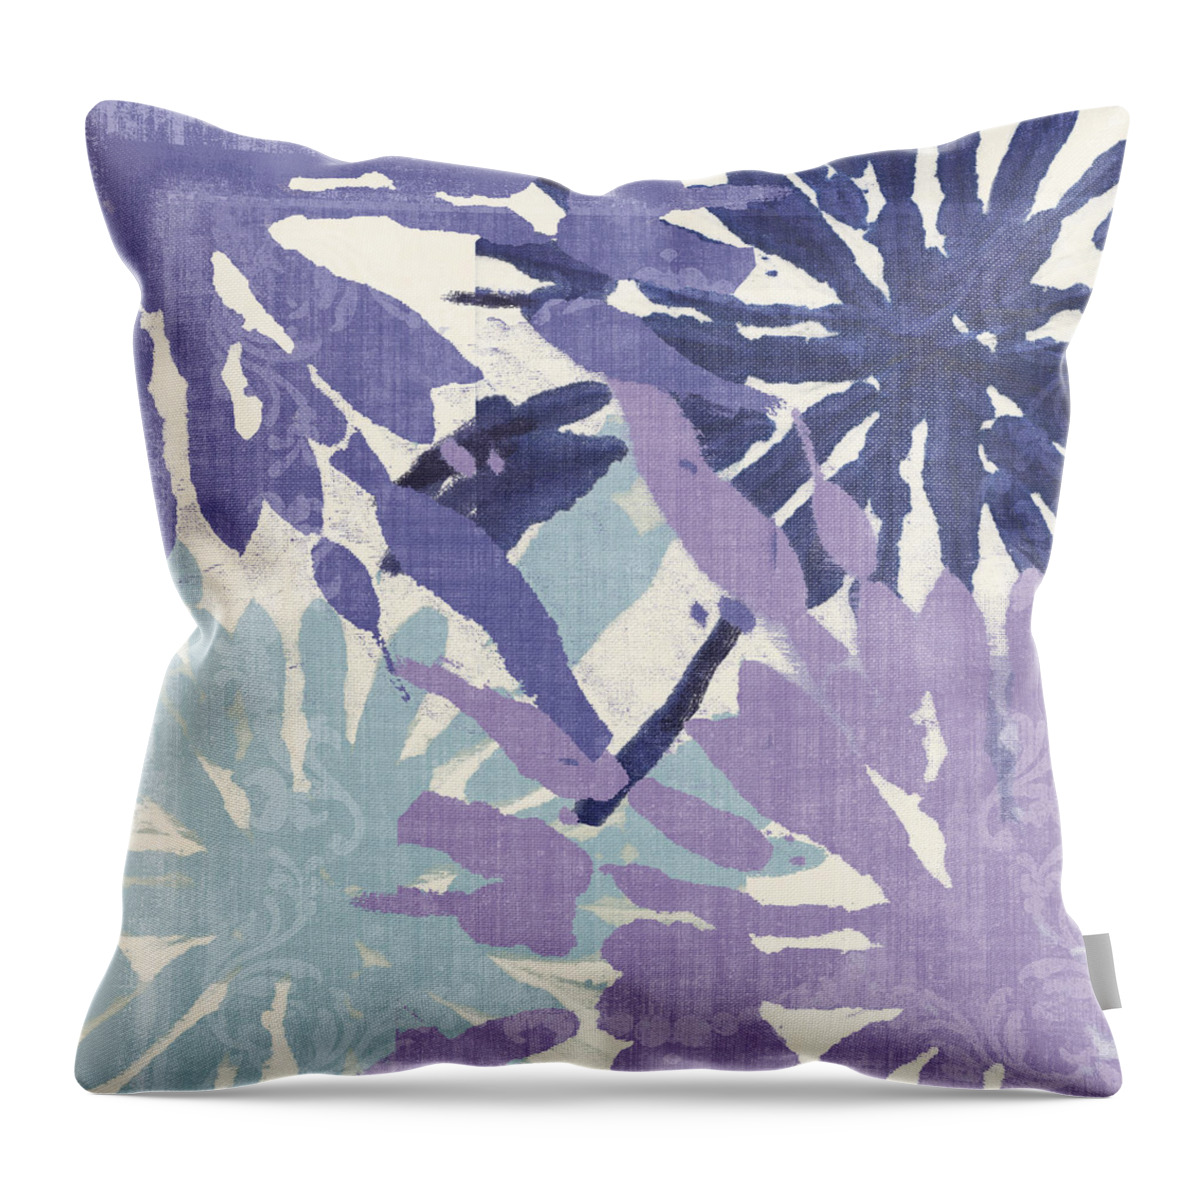 Ikat Throw Pillow featuring the painting Blue Curry II by Mindy Sommers